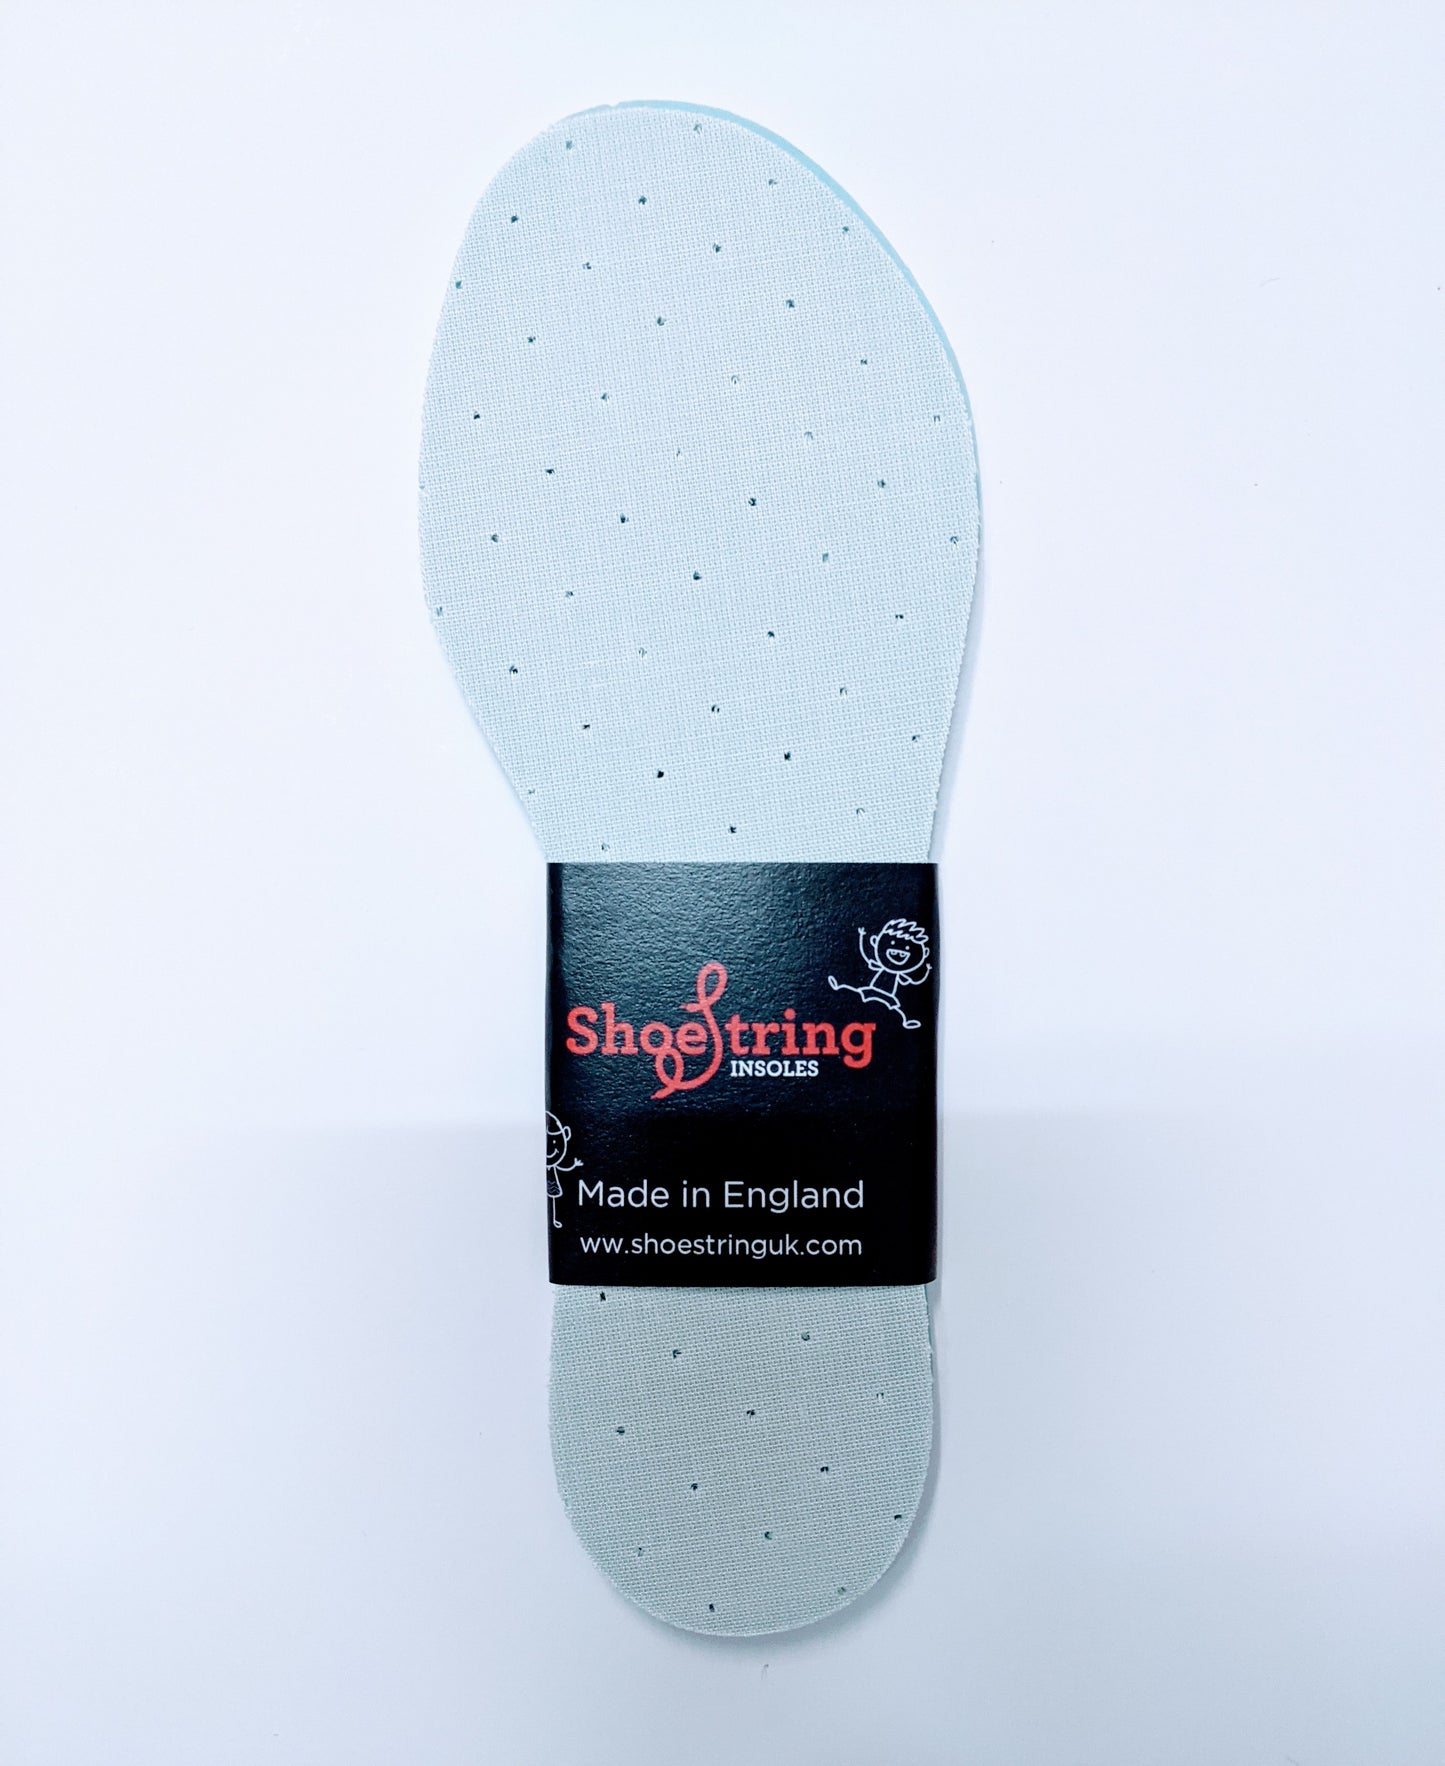 latex insole by Shoestring. Above view.